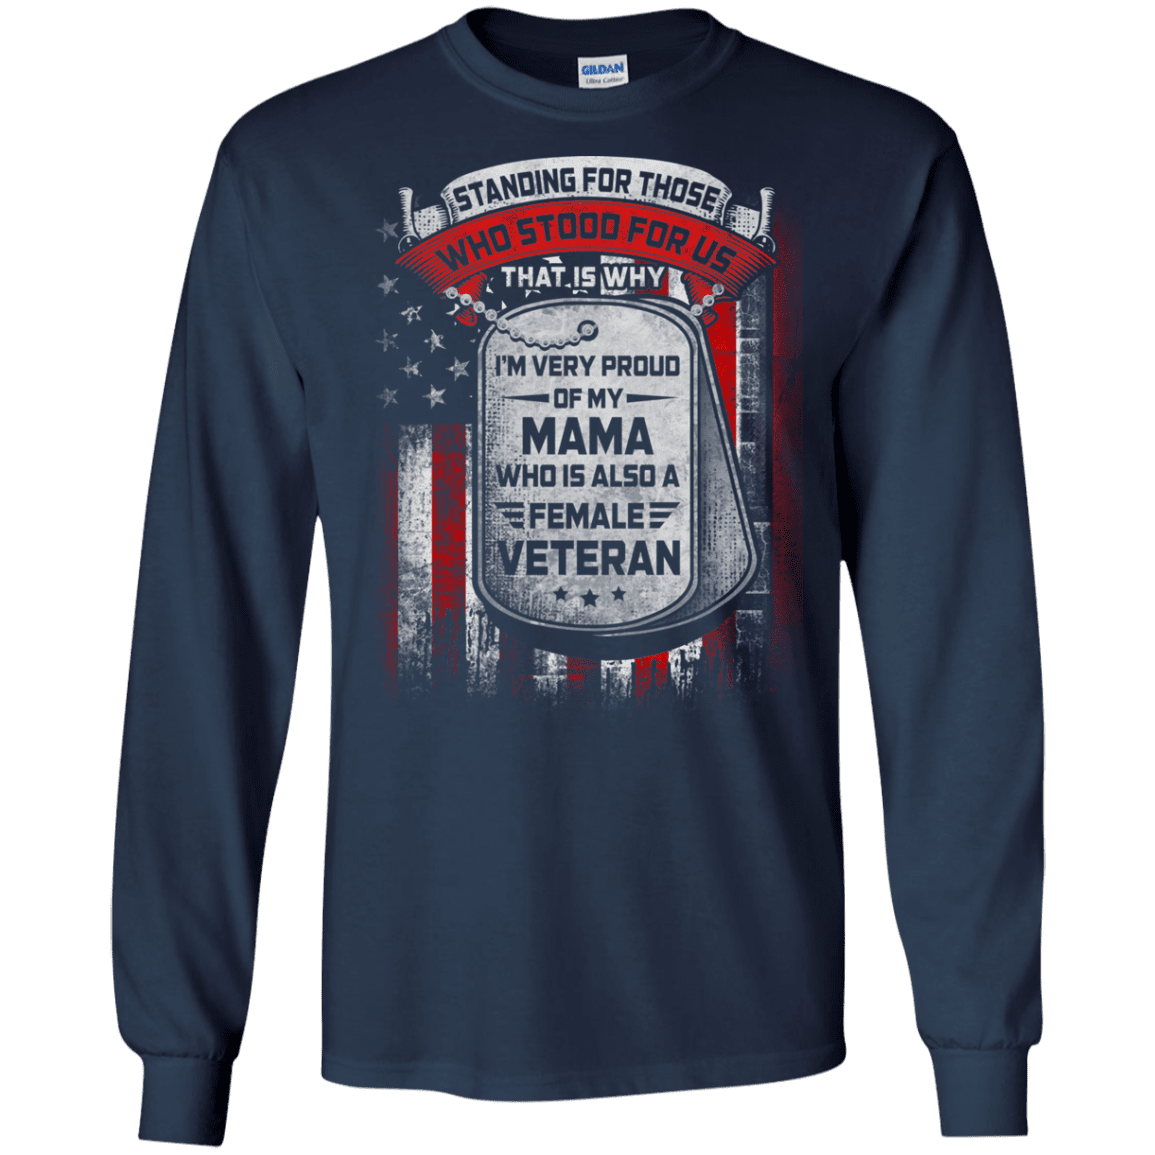 Military T-Shirt "Standing For Those Who Stood For Us" Front-TShirt-General-Veterans Nation